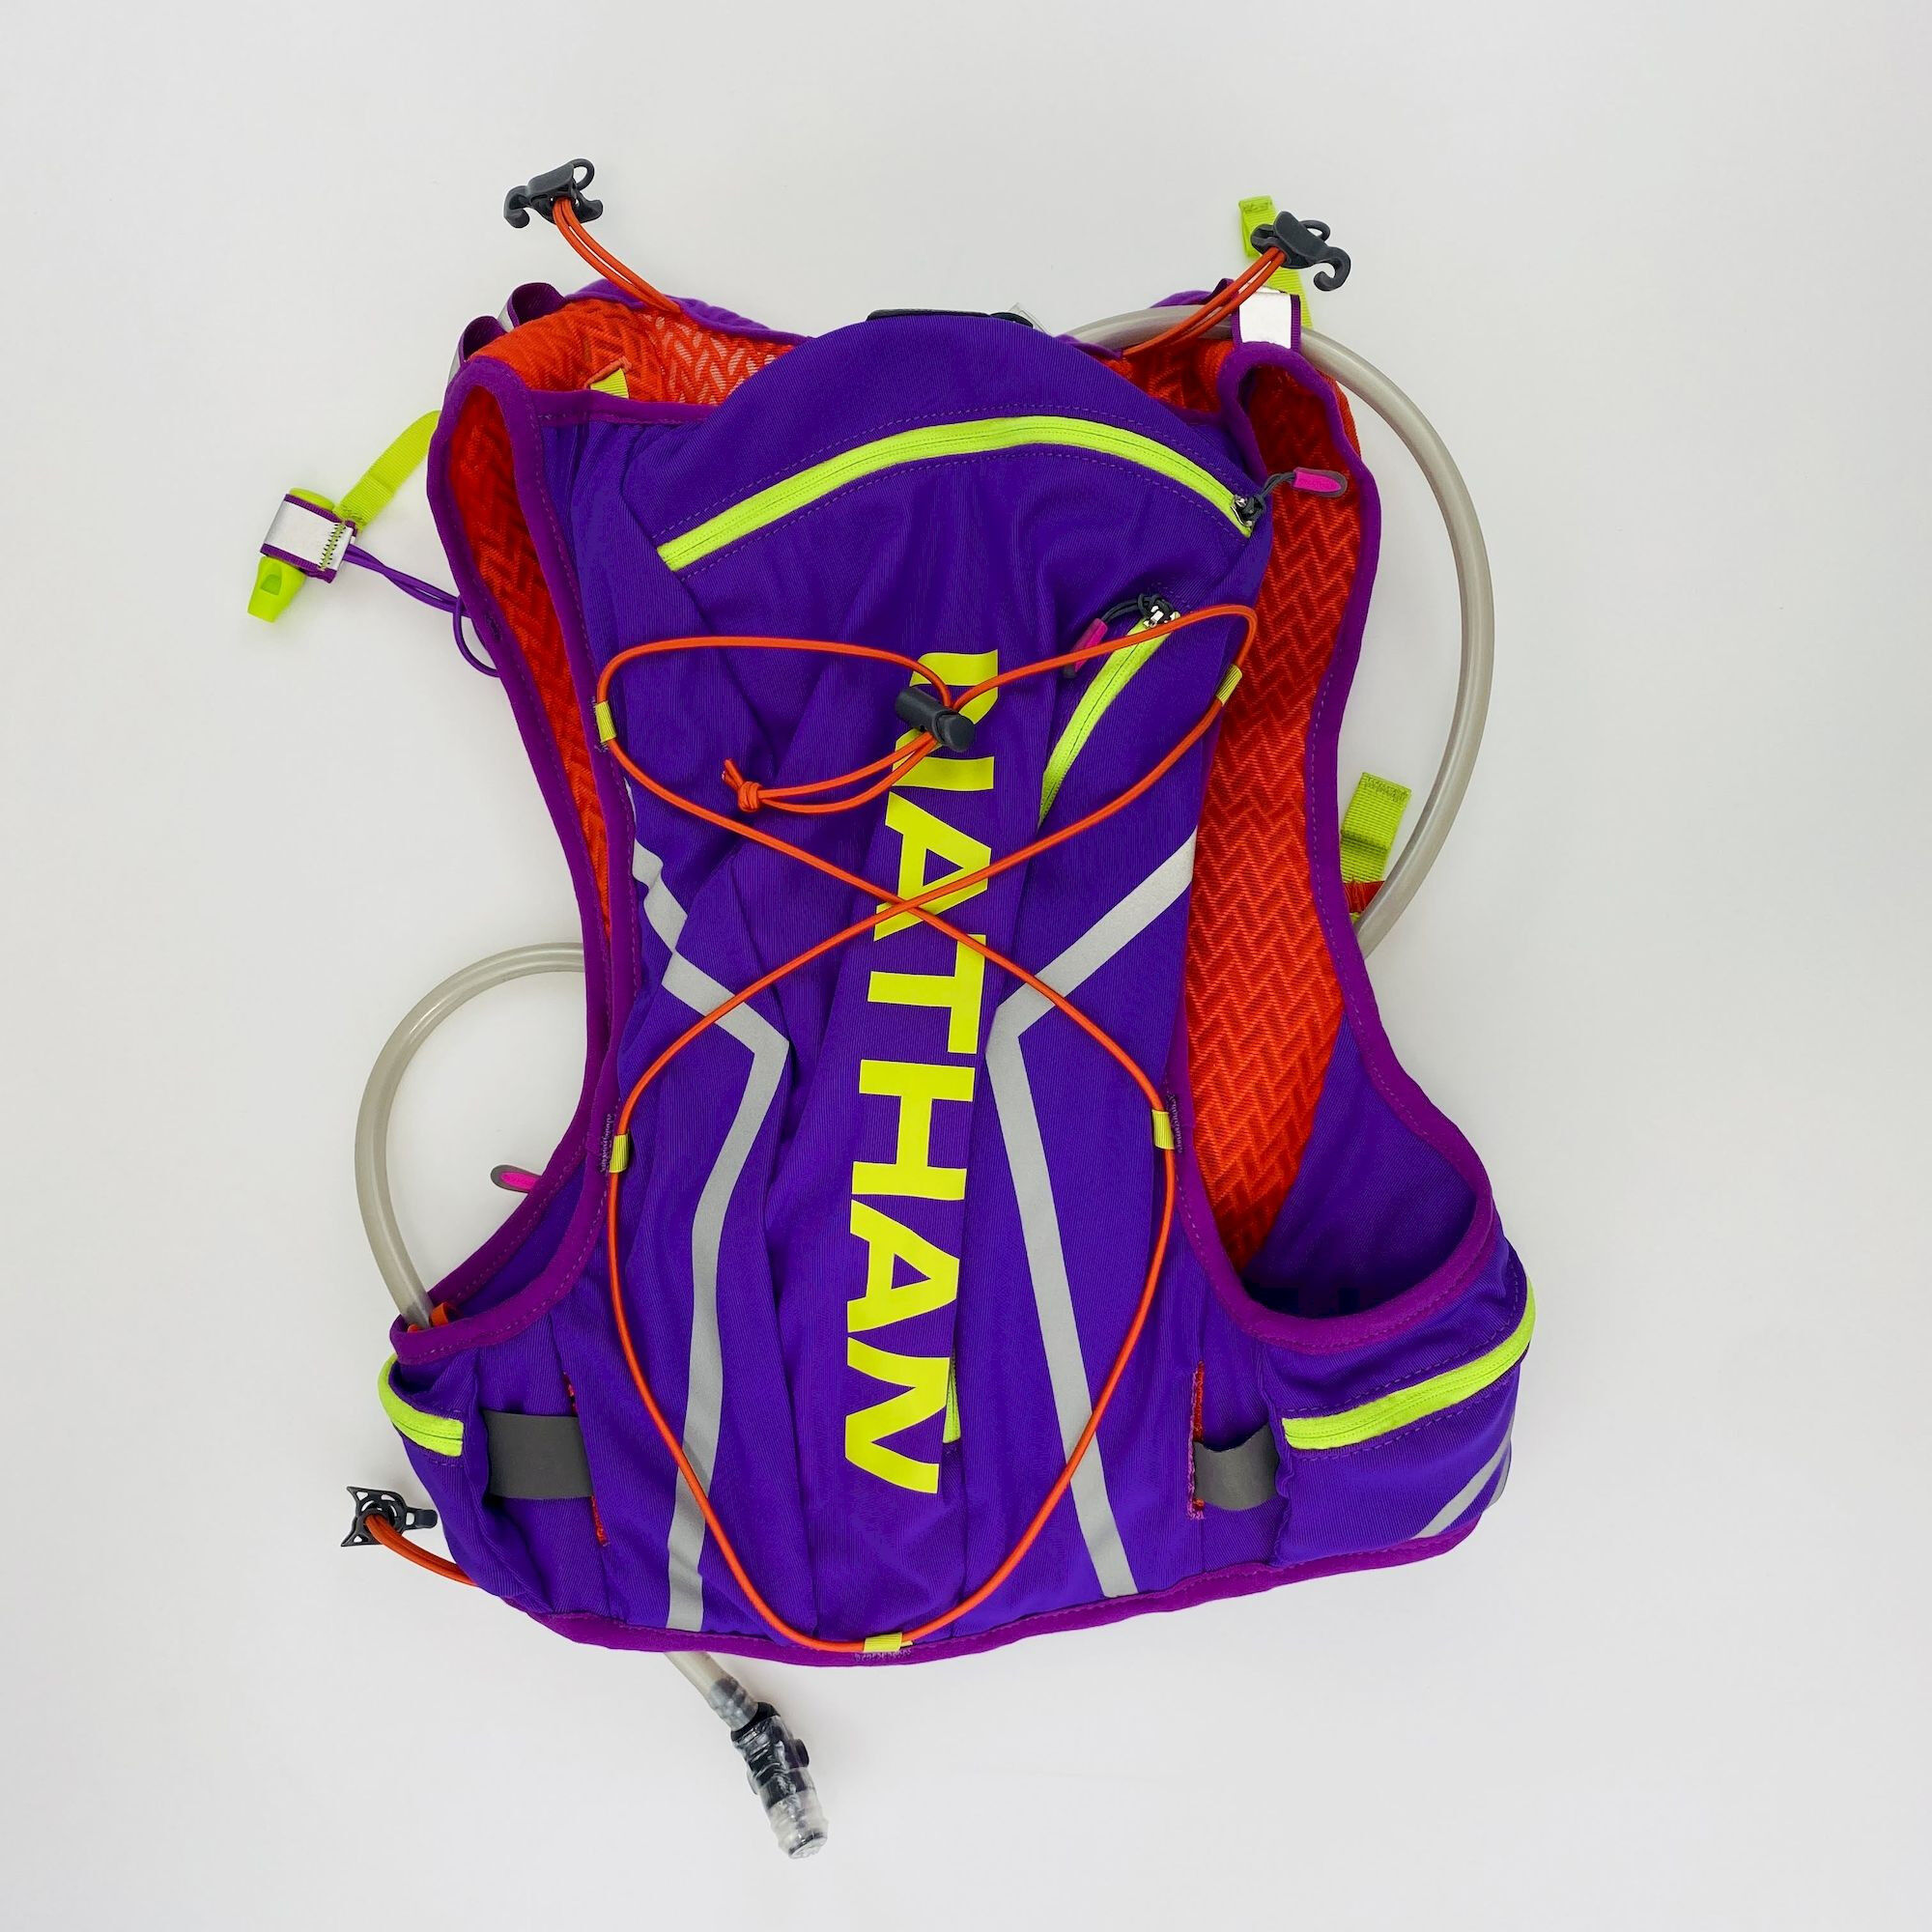 Nathan VaporShadow 11L - Seconde main Sac à dos running / trail homme - Violet - S/M | Hardloop